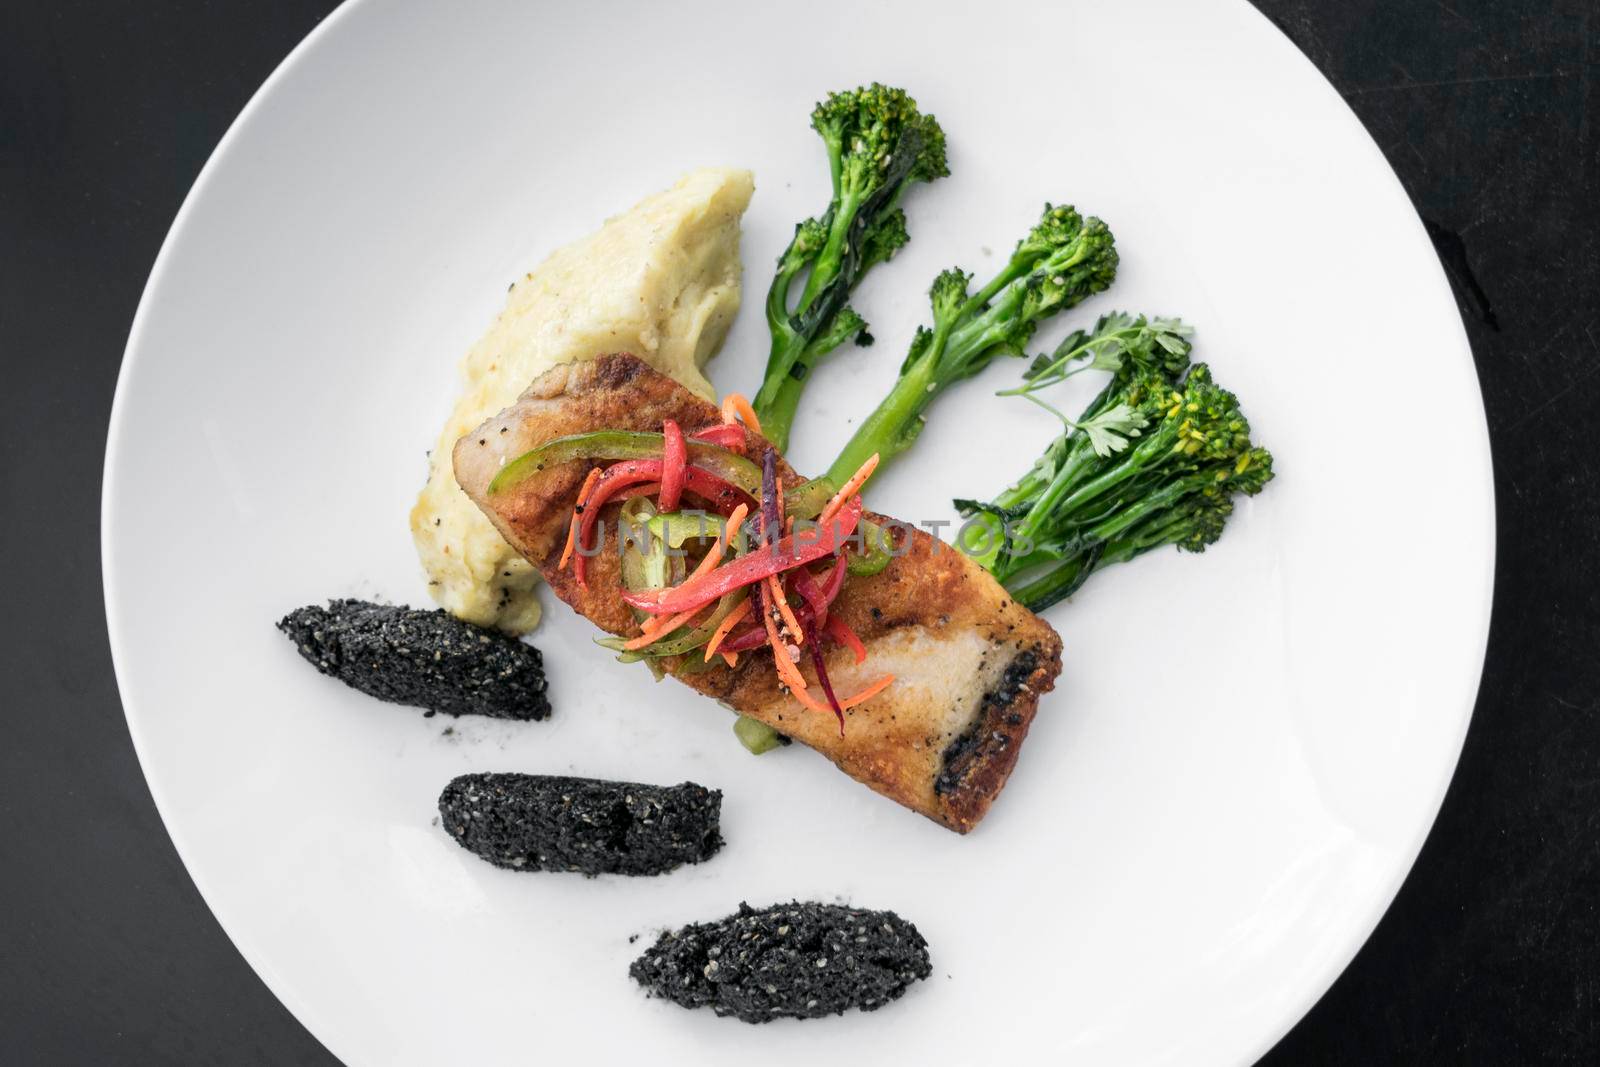 red snapper fish fillet with vegetables and black sesame rice by jackmalipan